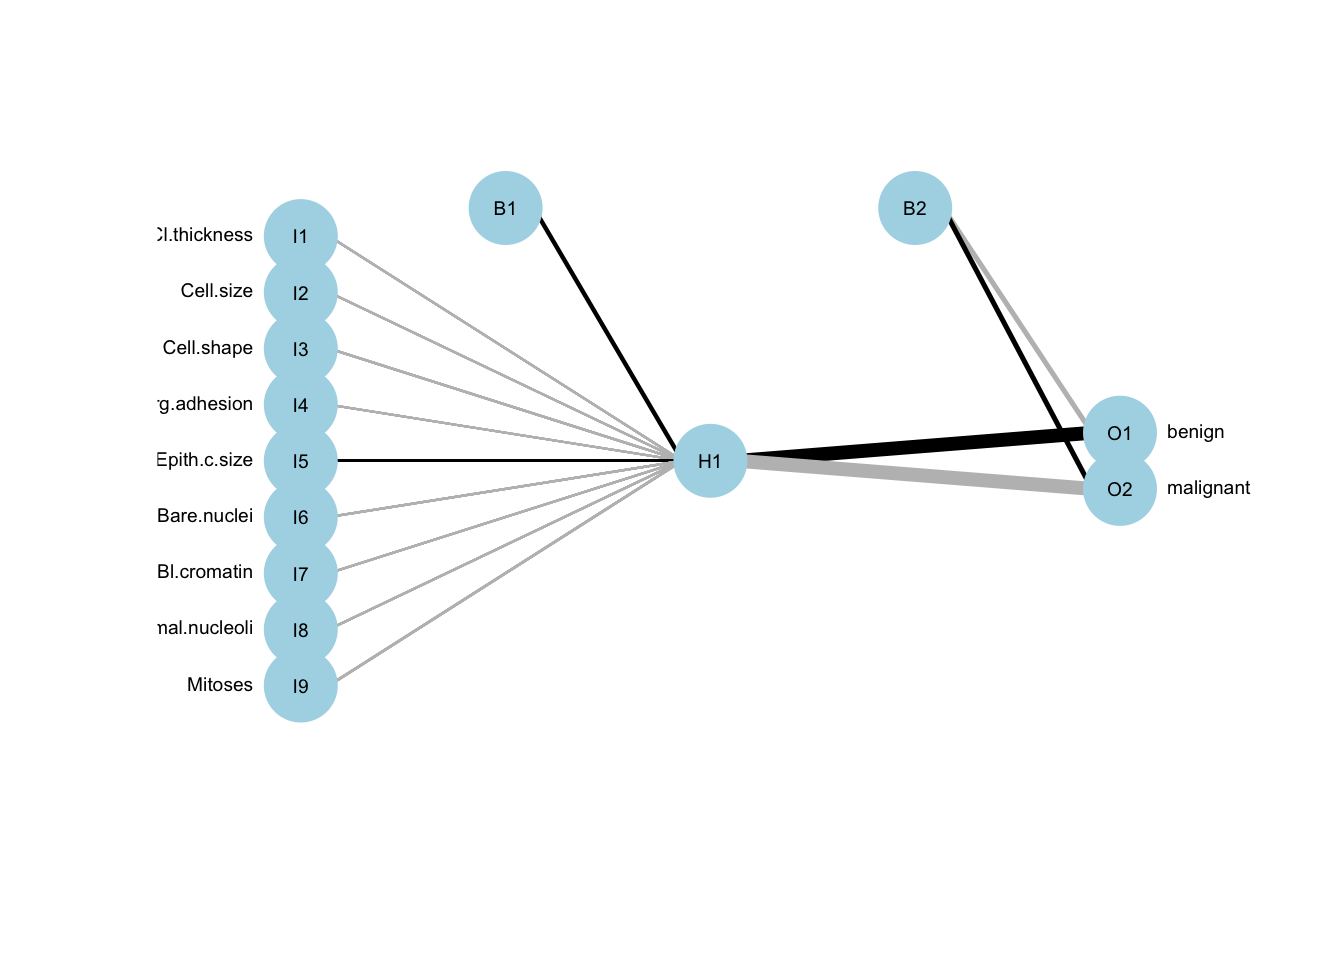 ANN model representation. The black lines show the connections between each layer and the weights on each connection; B nodes represent bias terms added in each step (bias nodes), and the hidden nodes are the ones between the input and output, here only one node